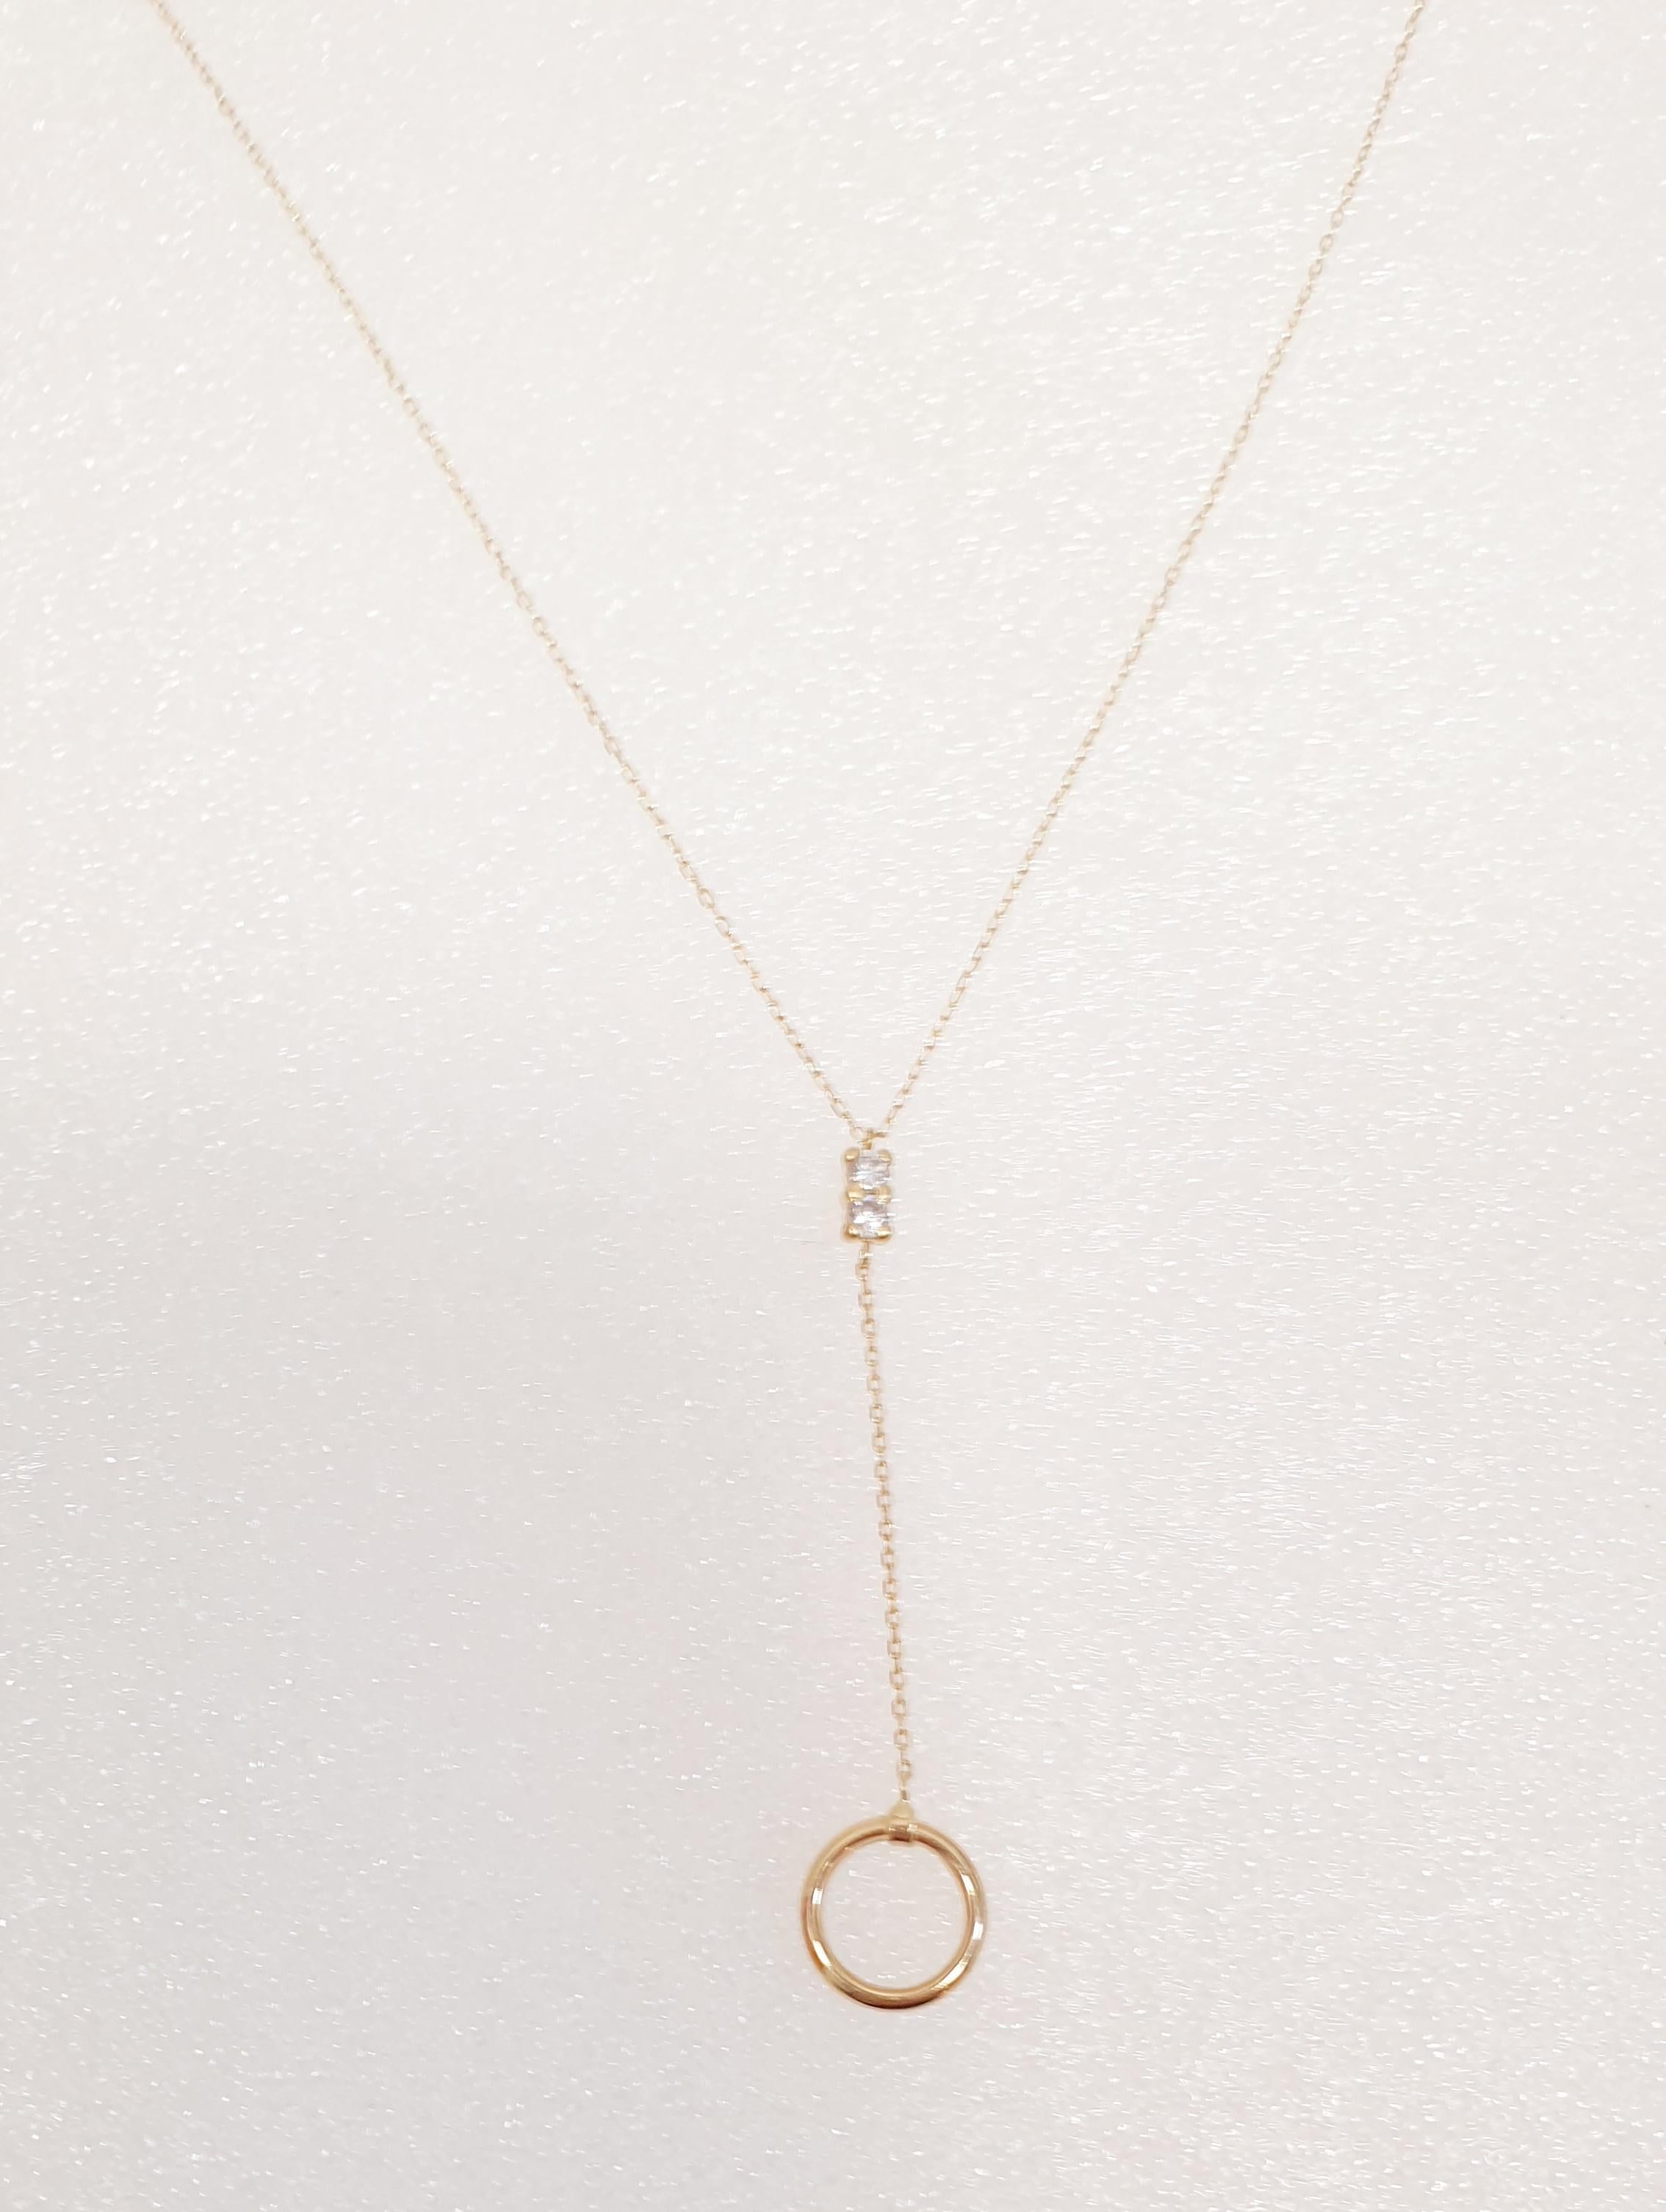 18 Karat Yellow Gold Necklace with Gold Tie-Shaped Pendant and Diamonds

READY TO SHIP
*Shipment of this piece is not affected by COVID-19. Orders welcome!

MATERIAL
◘ Weight 1.7 grams with chain
◘ Chain lenght 43cm /40cm or 16,92 inches/15,74